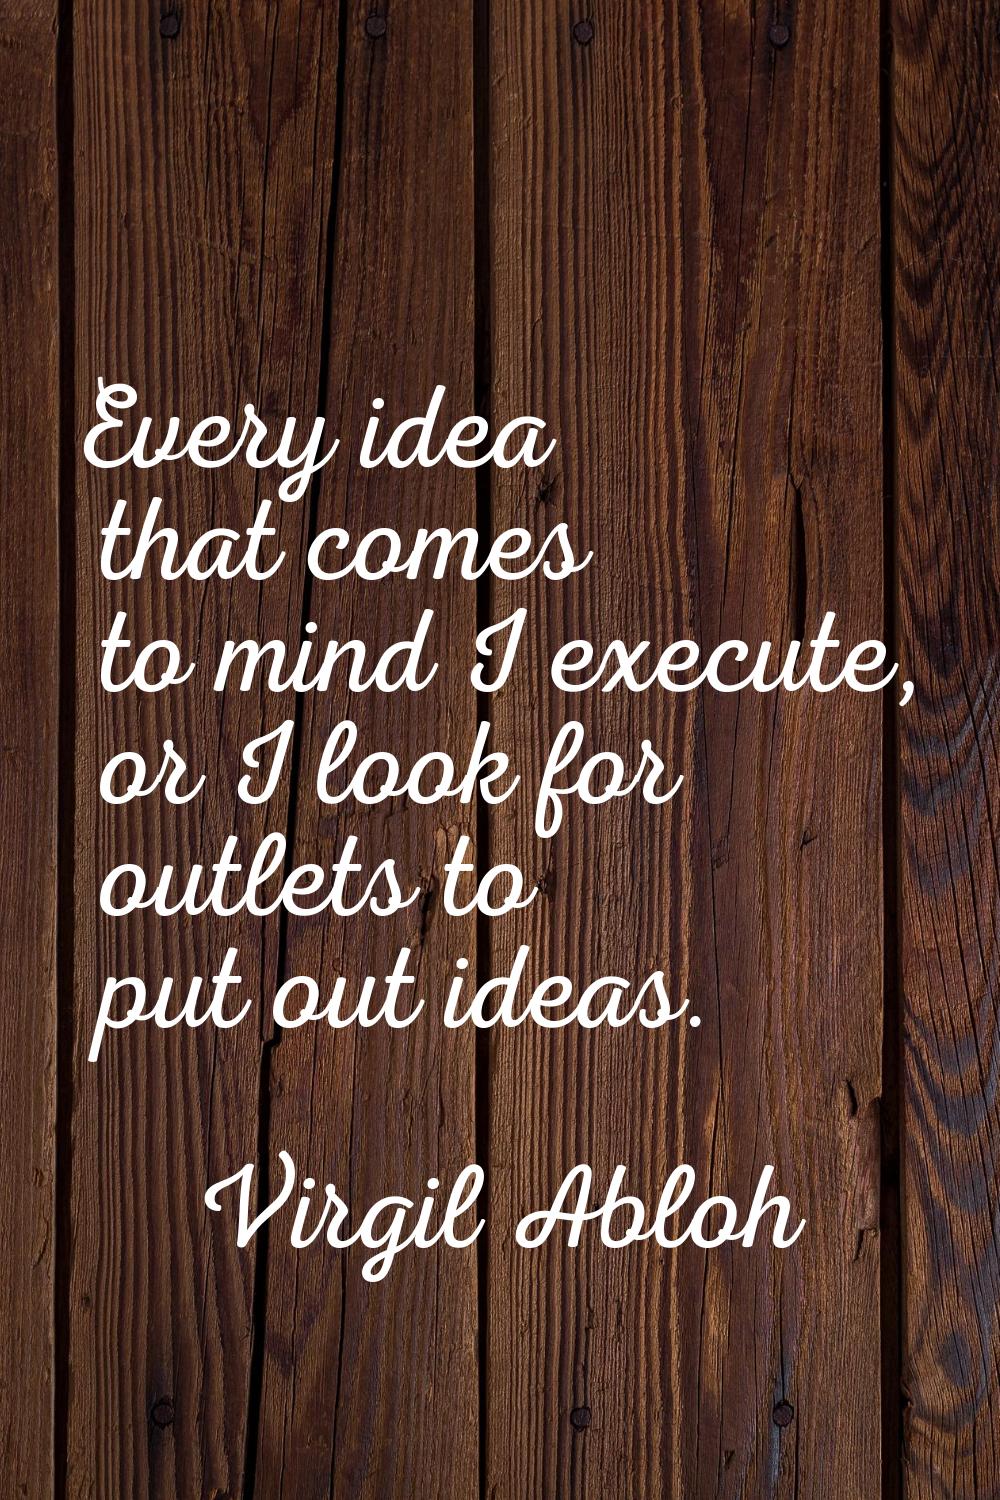 Every idea that comes to mind I execute, or I look for outlets to put out ideas.